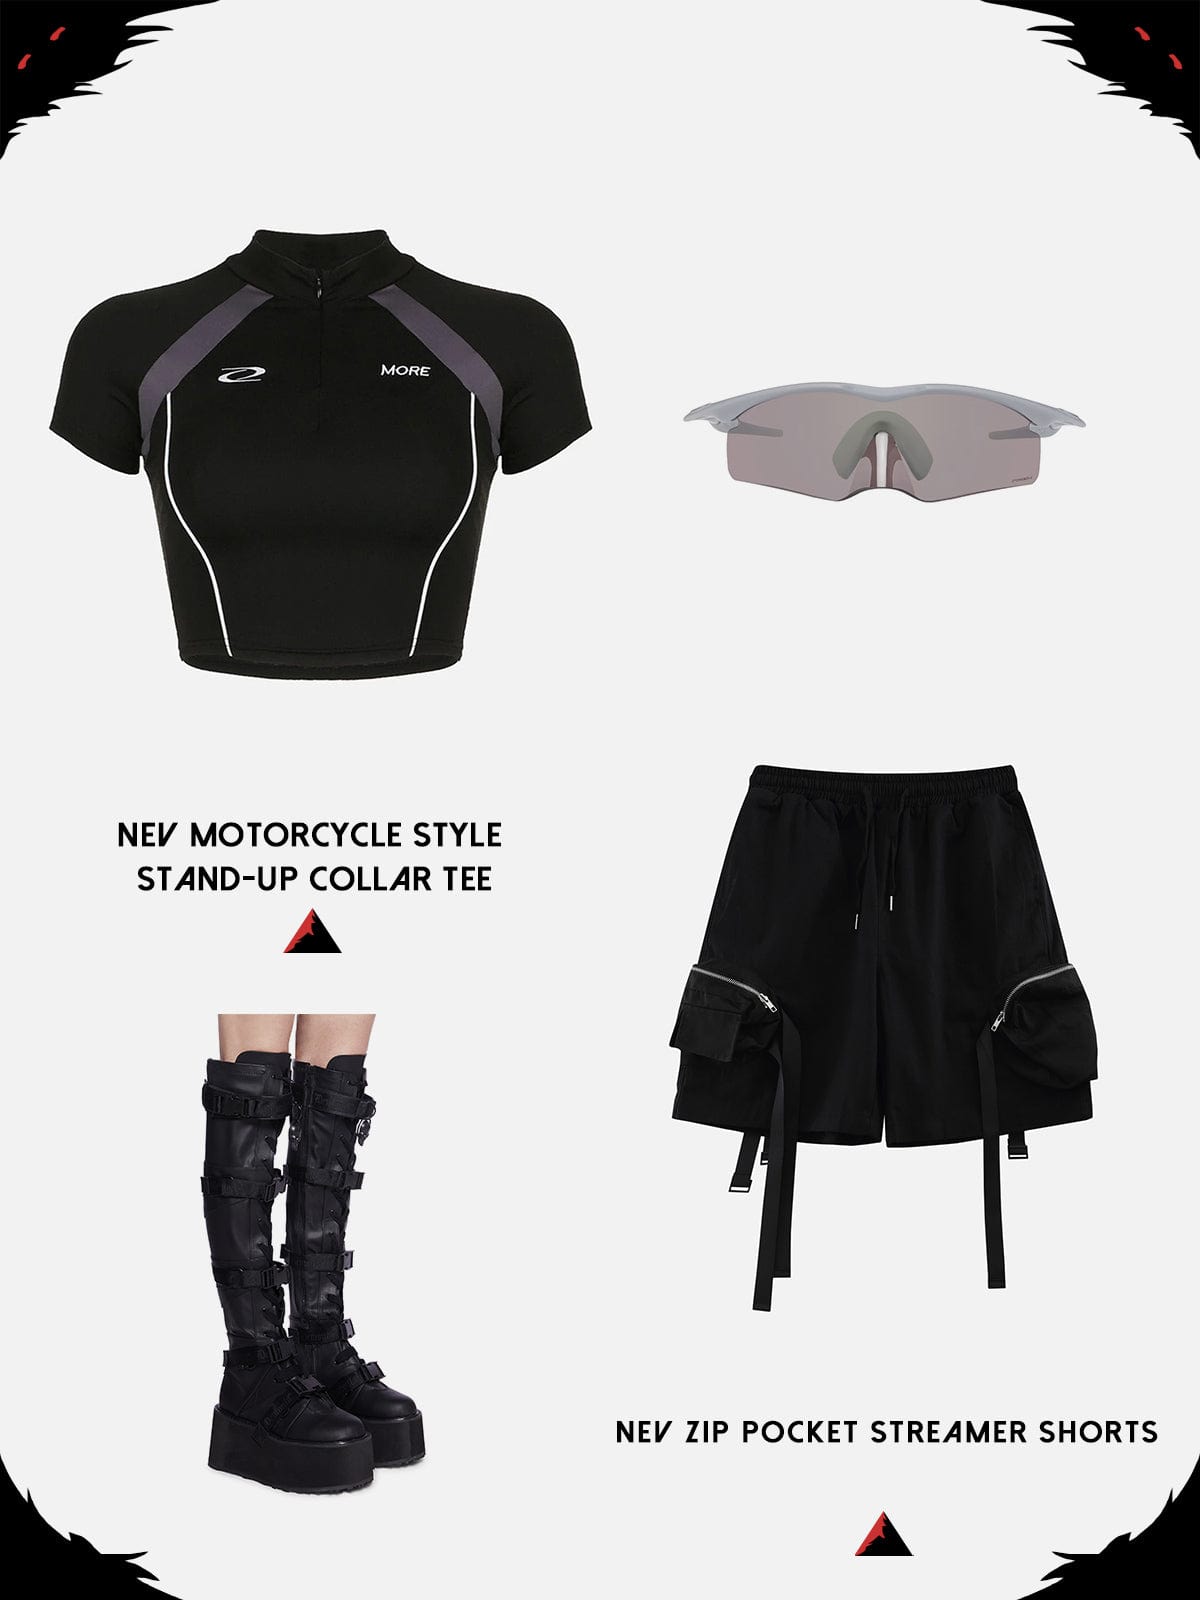 NEV Motorcycle Style Stand-Up Collar Tee